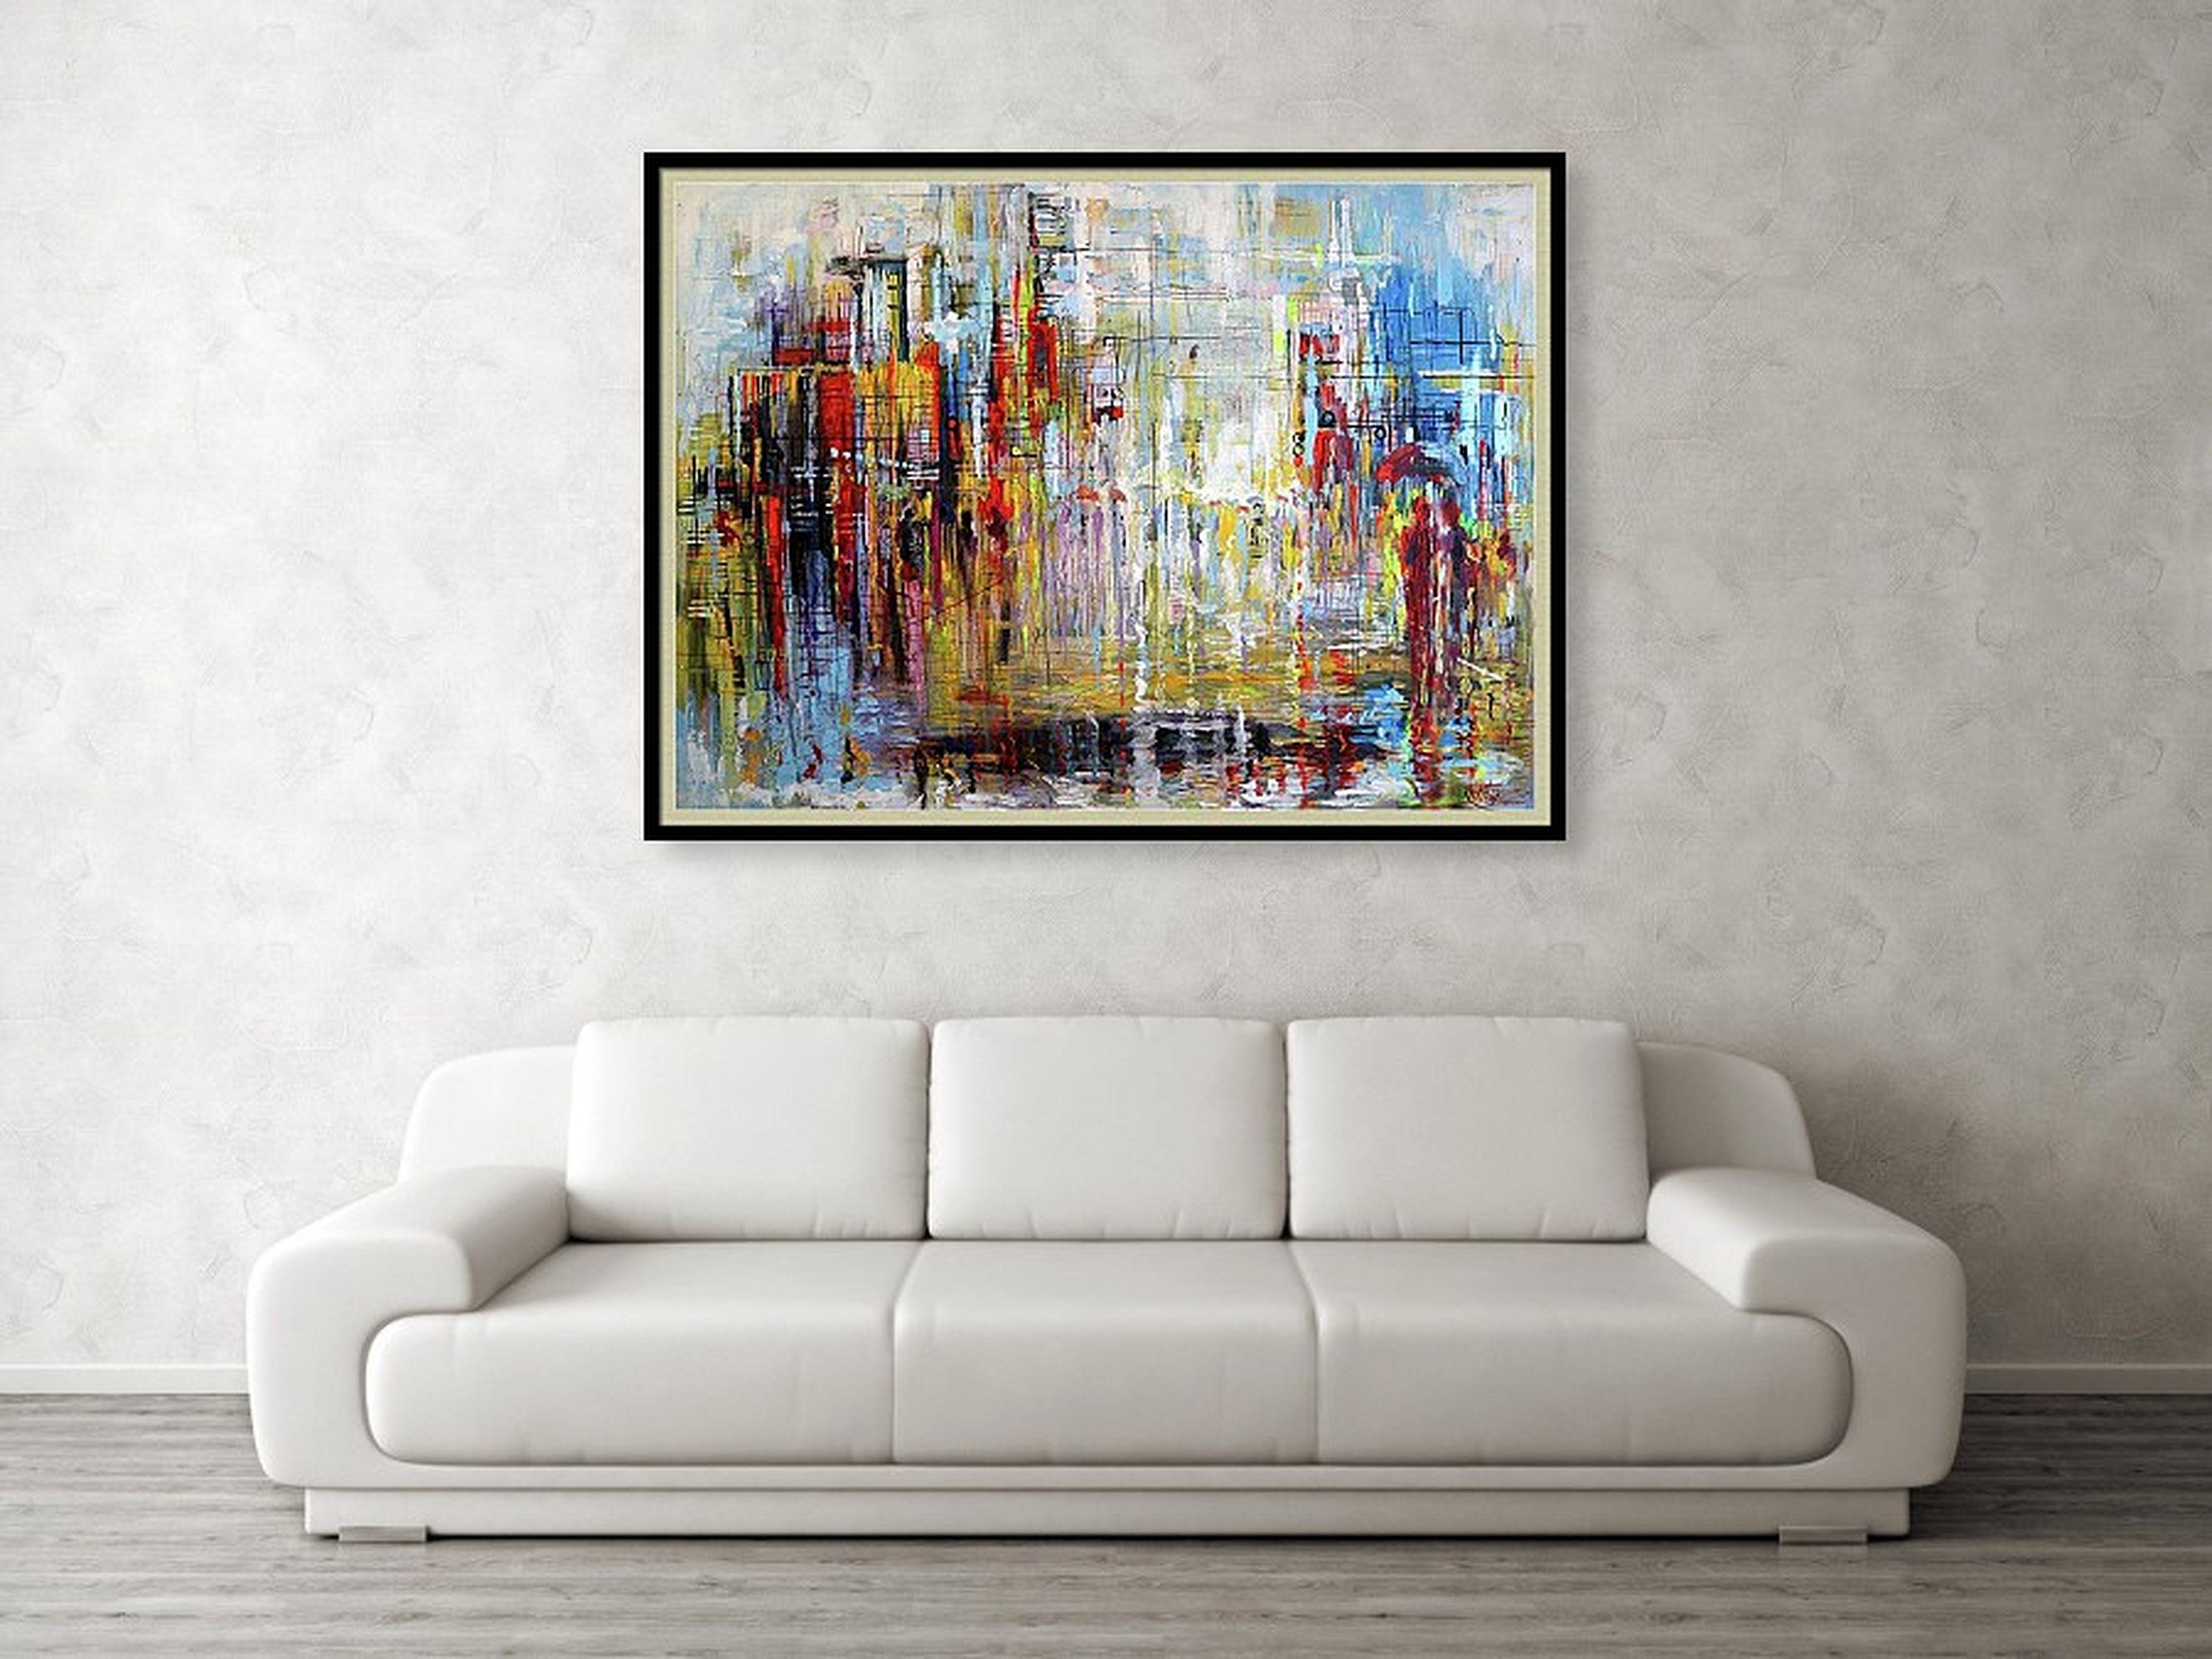 In this visceral cityscape, I mingled acrylics, oils, and colored pencils to craft an abstract world bursting with emotive energy. My strokes embrace impressionism's play of light and expressionism's intense emotion. Here, symbolic elements hint at